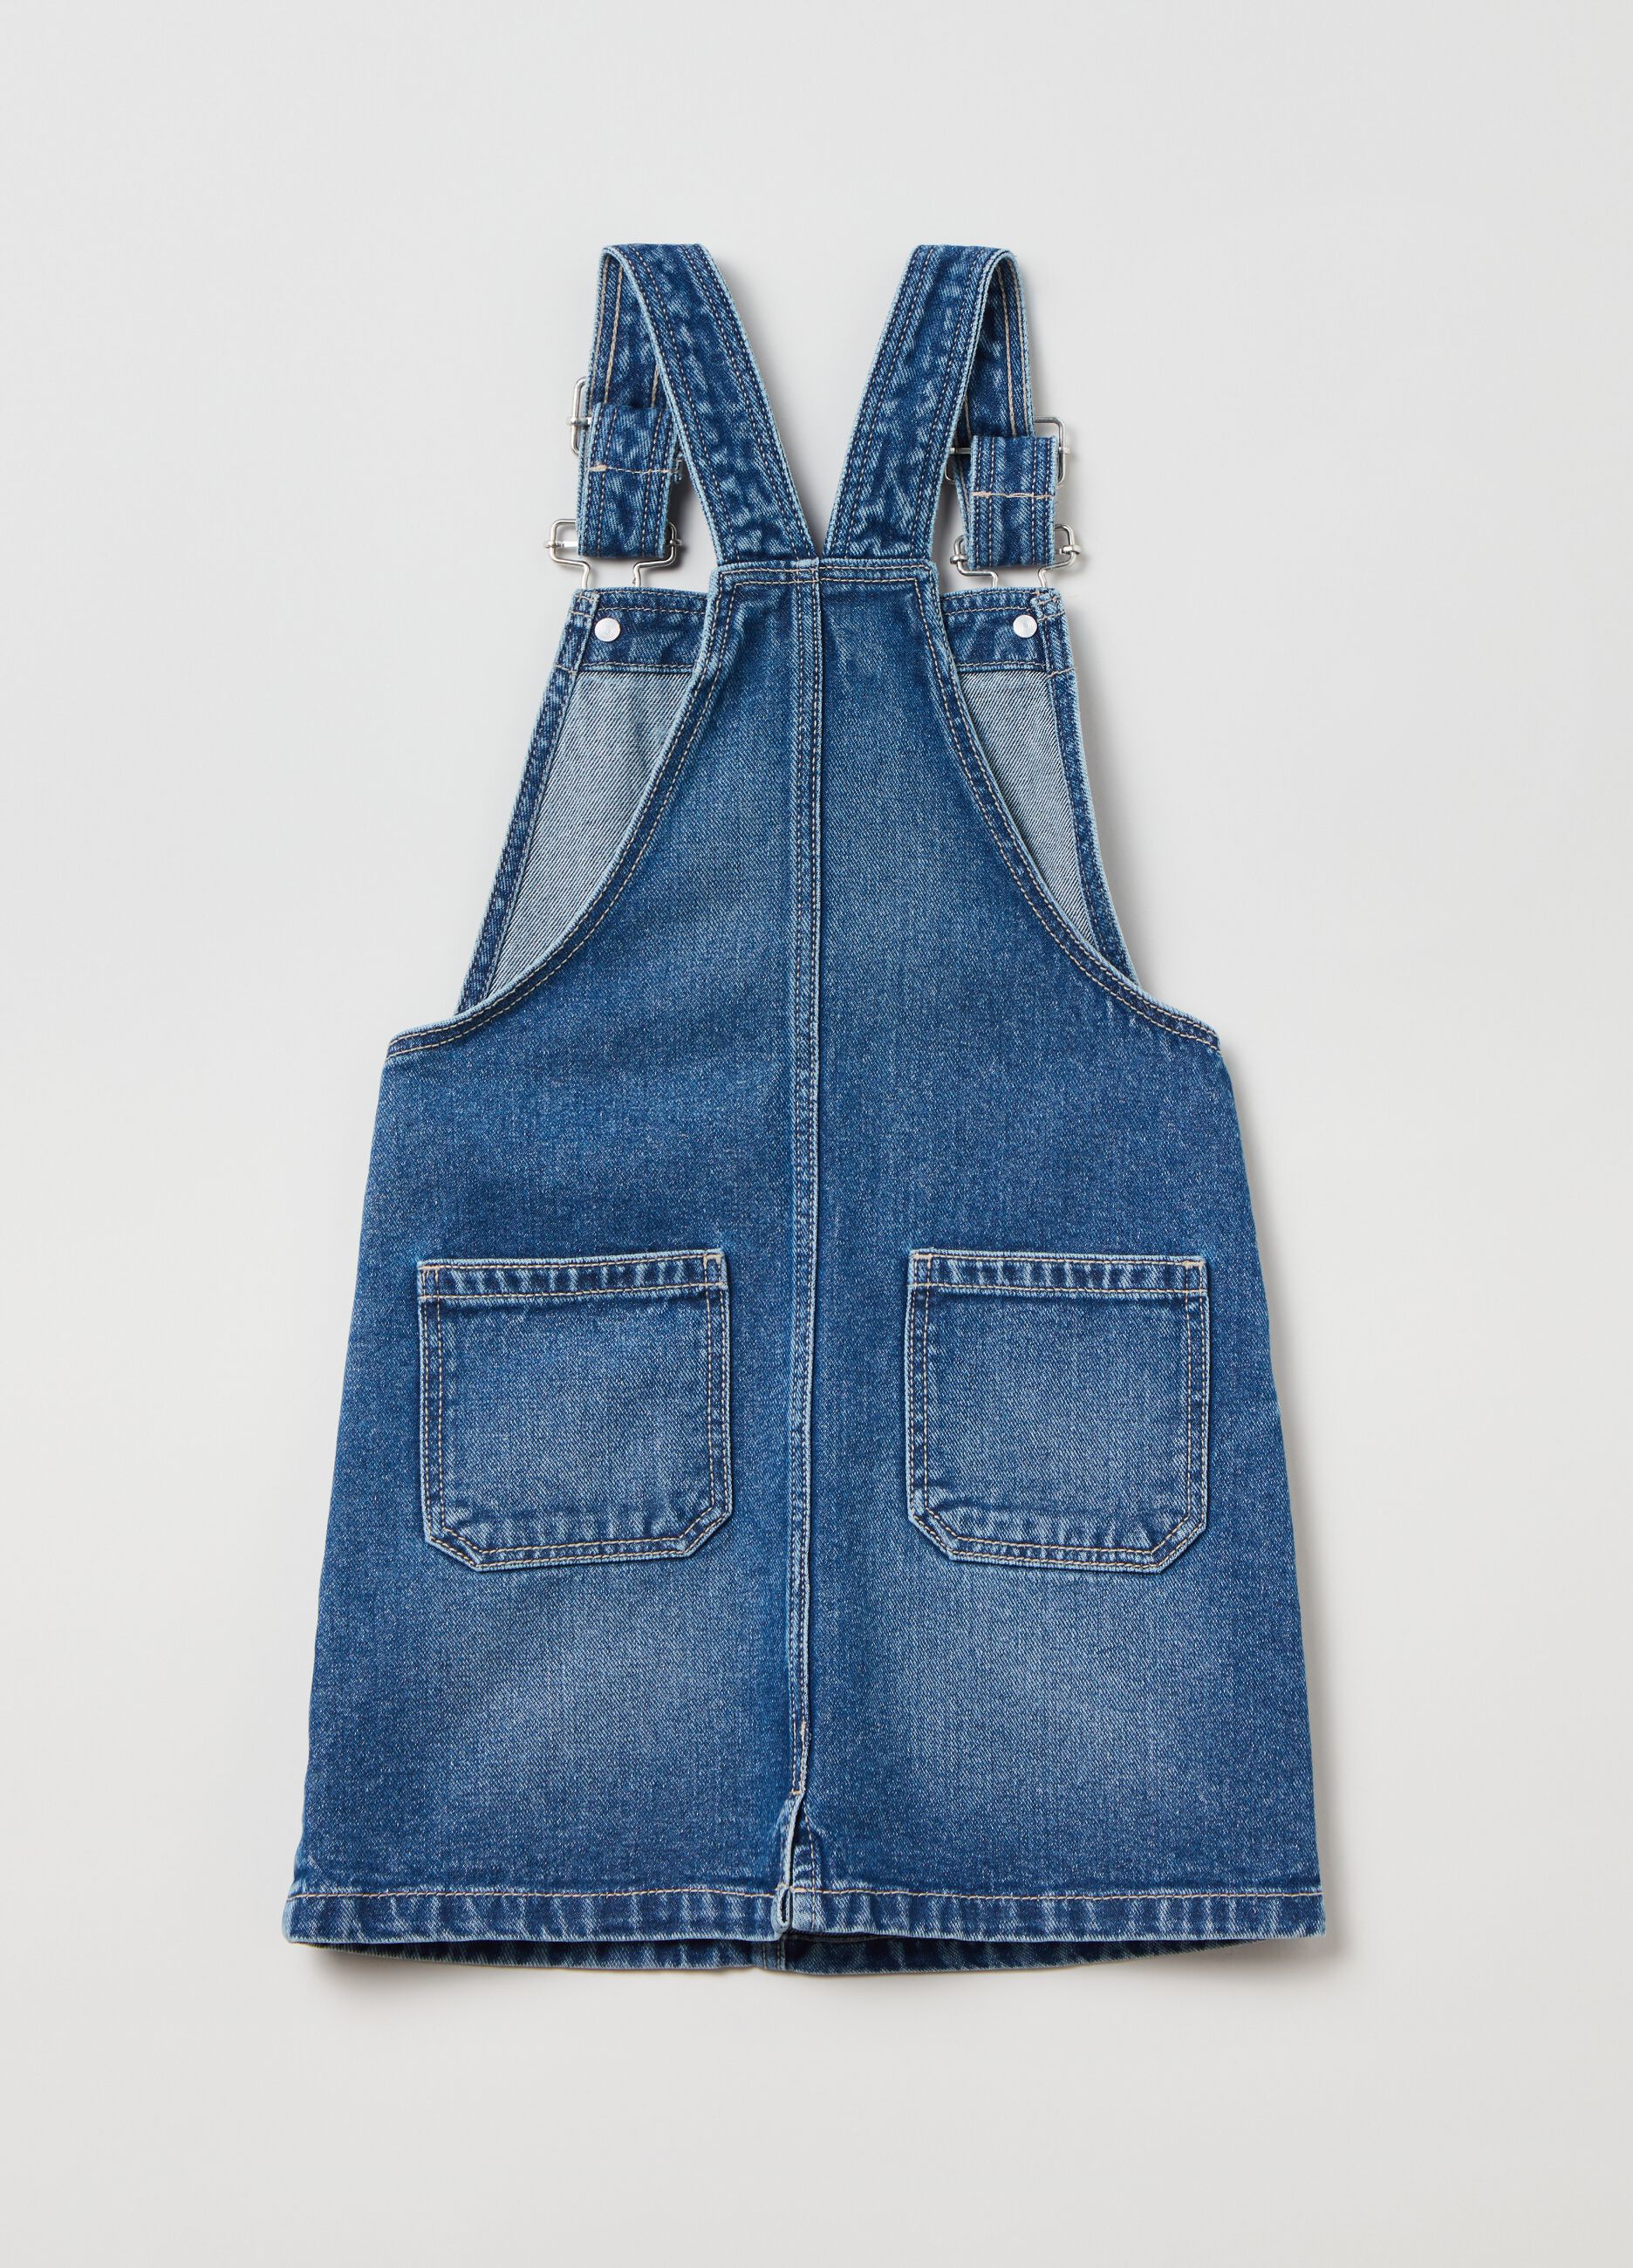 Dungaree dress in denim with pockets